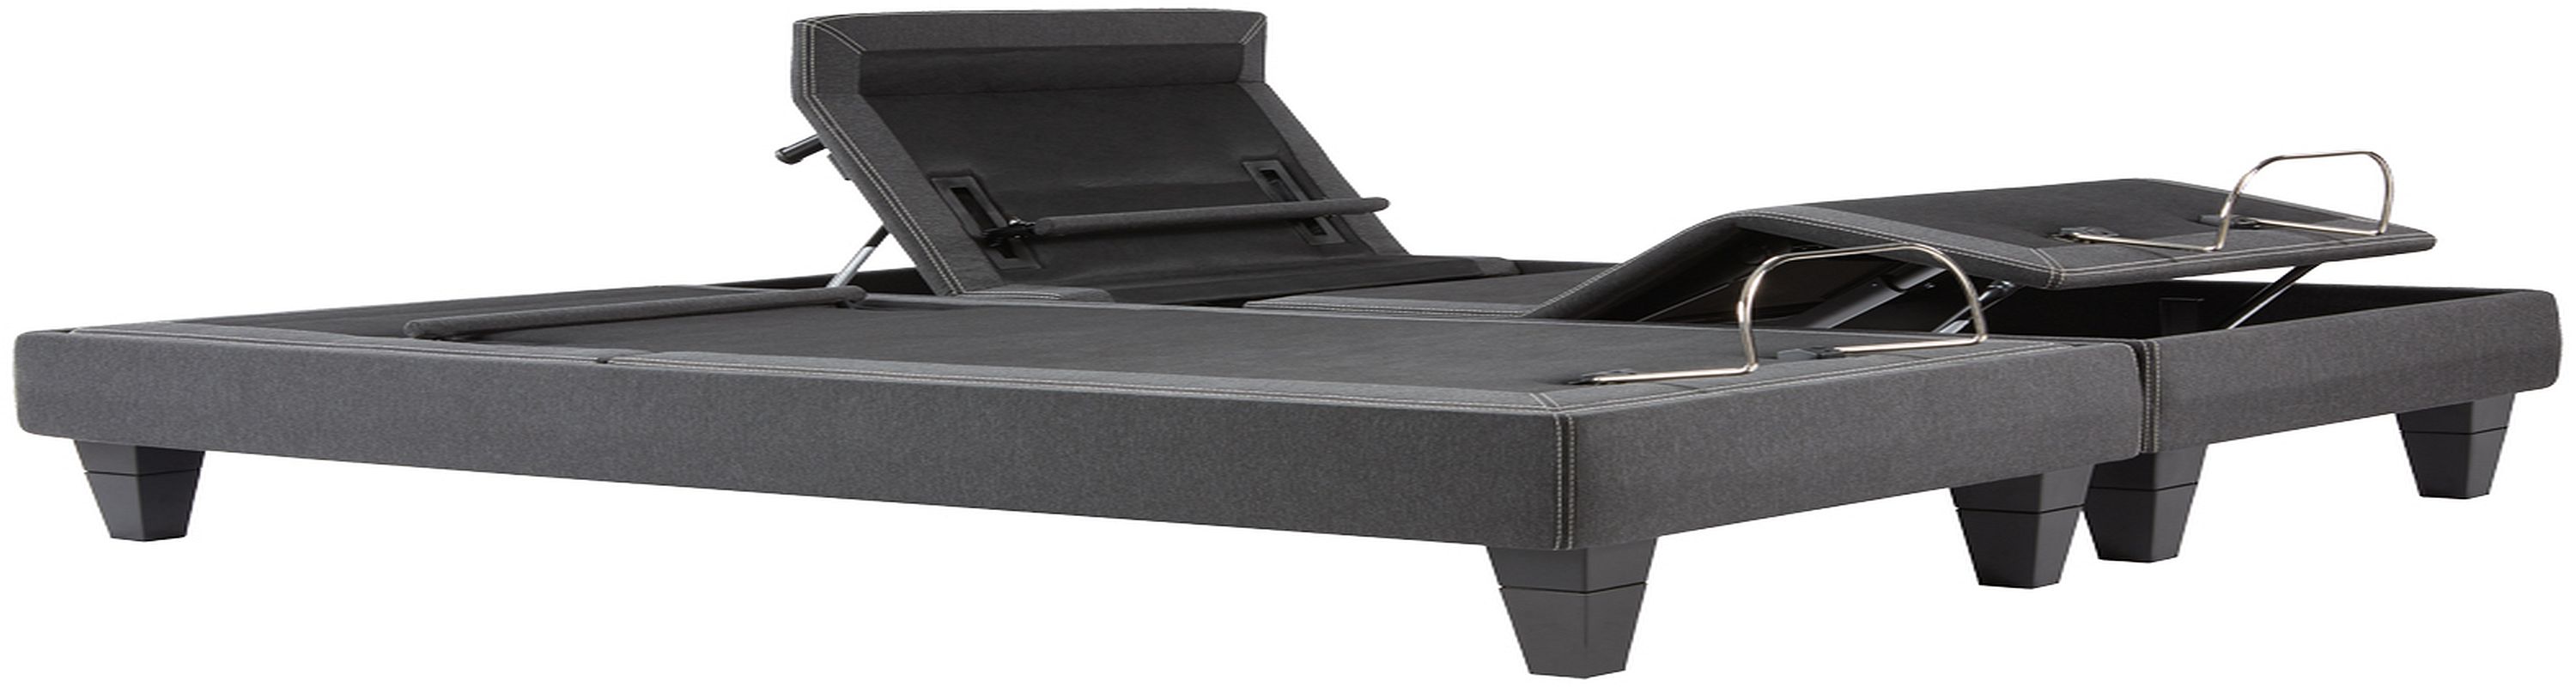 Beautyrest Black Luxury Adjustable Base California King - (Must purchase 2 for complete set